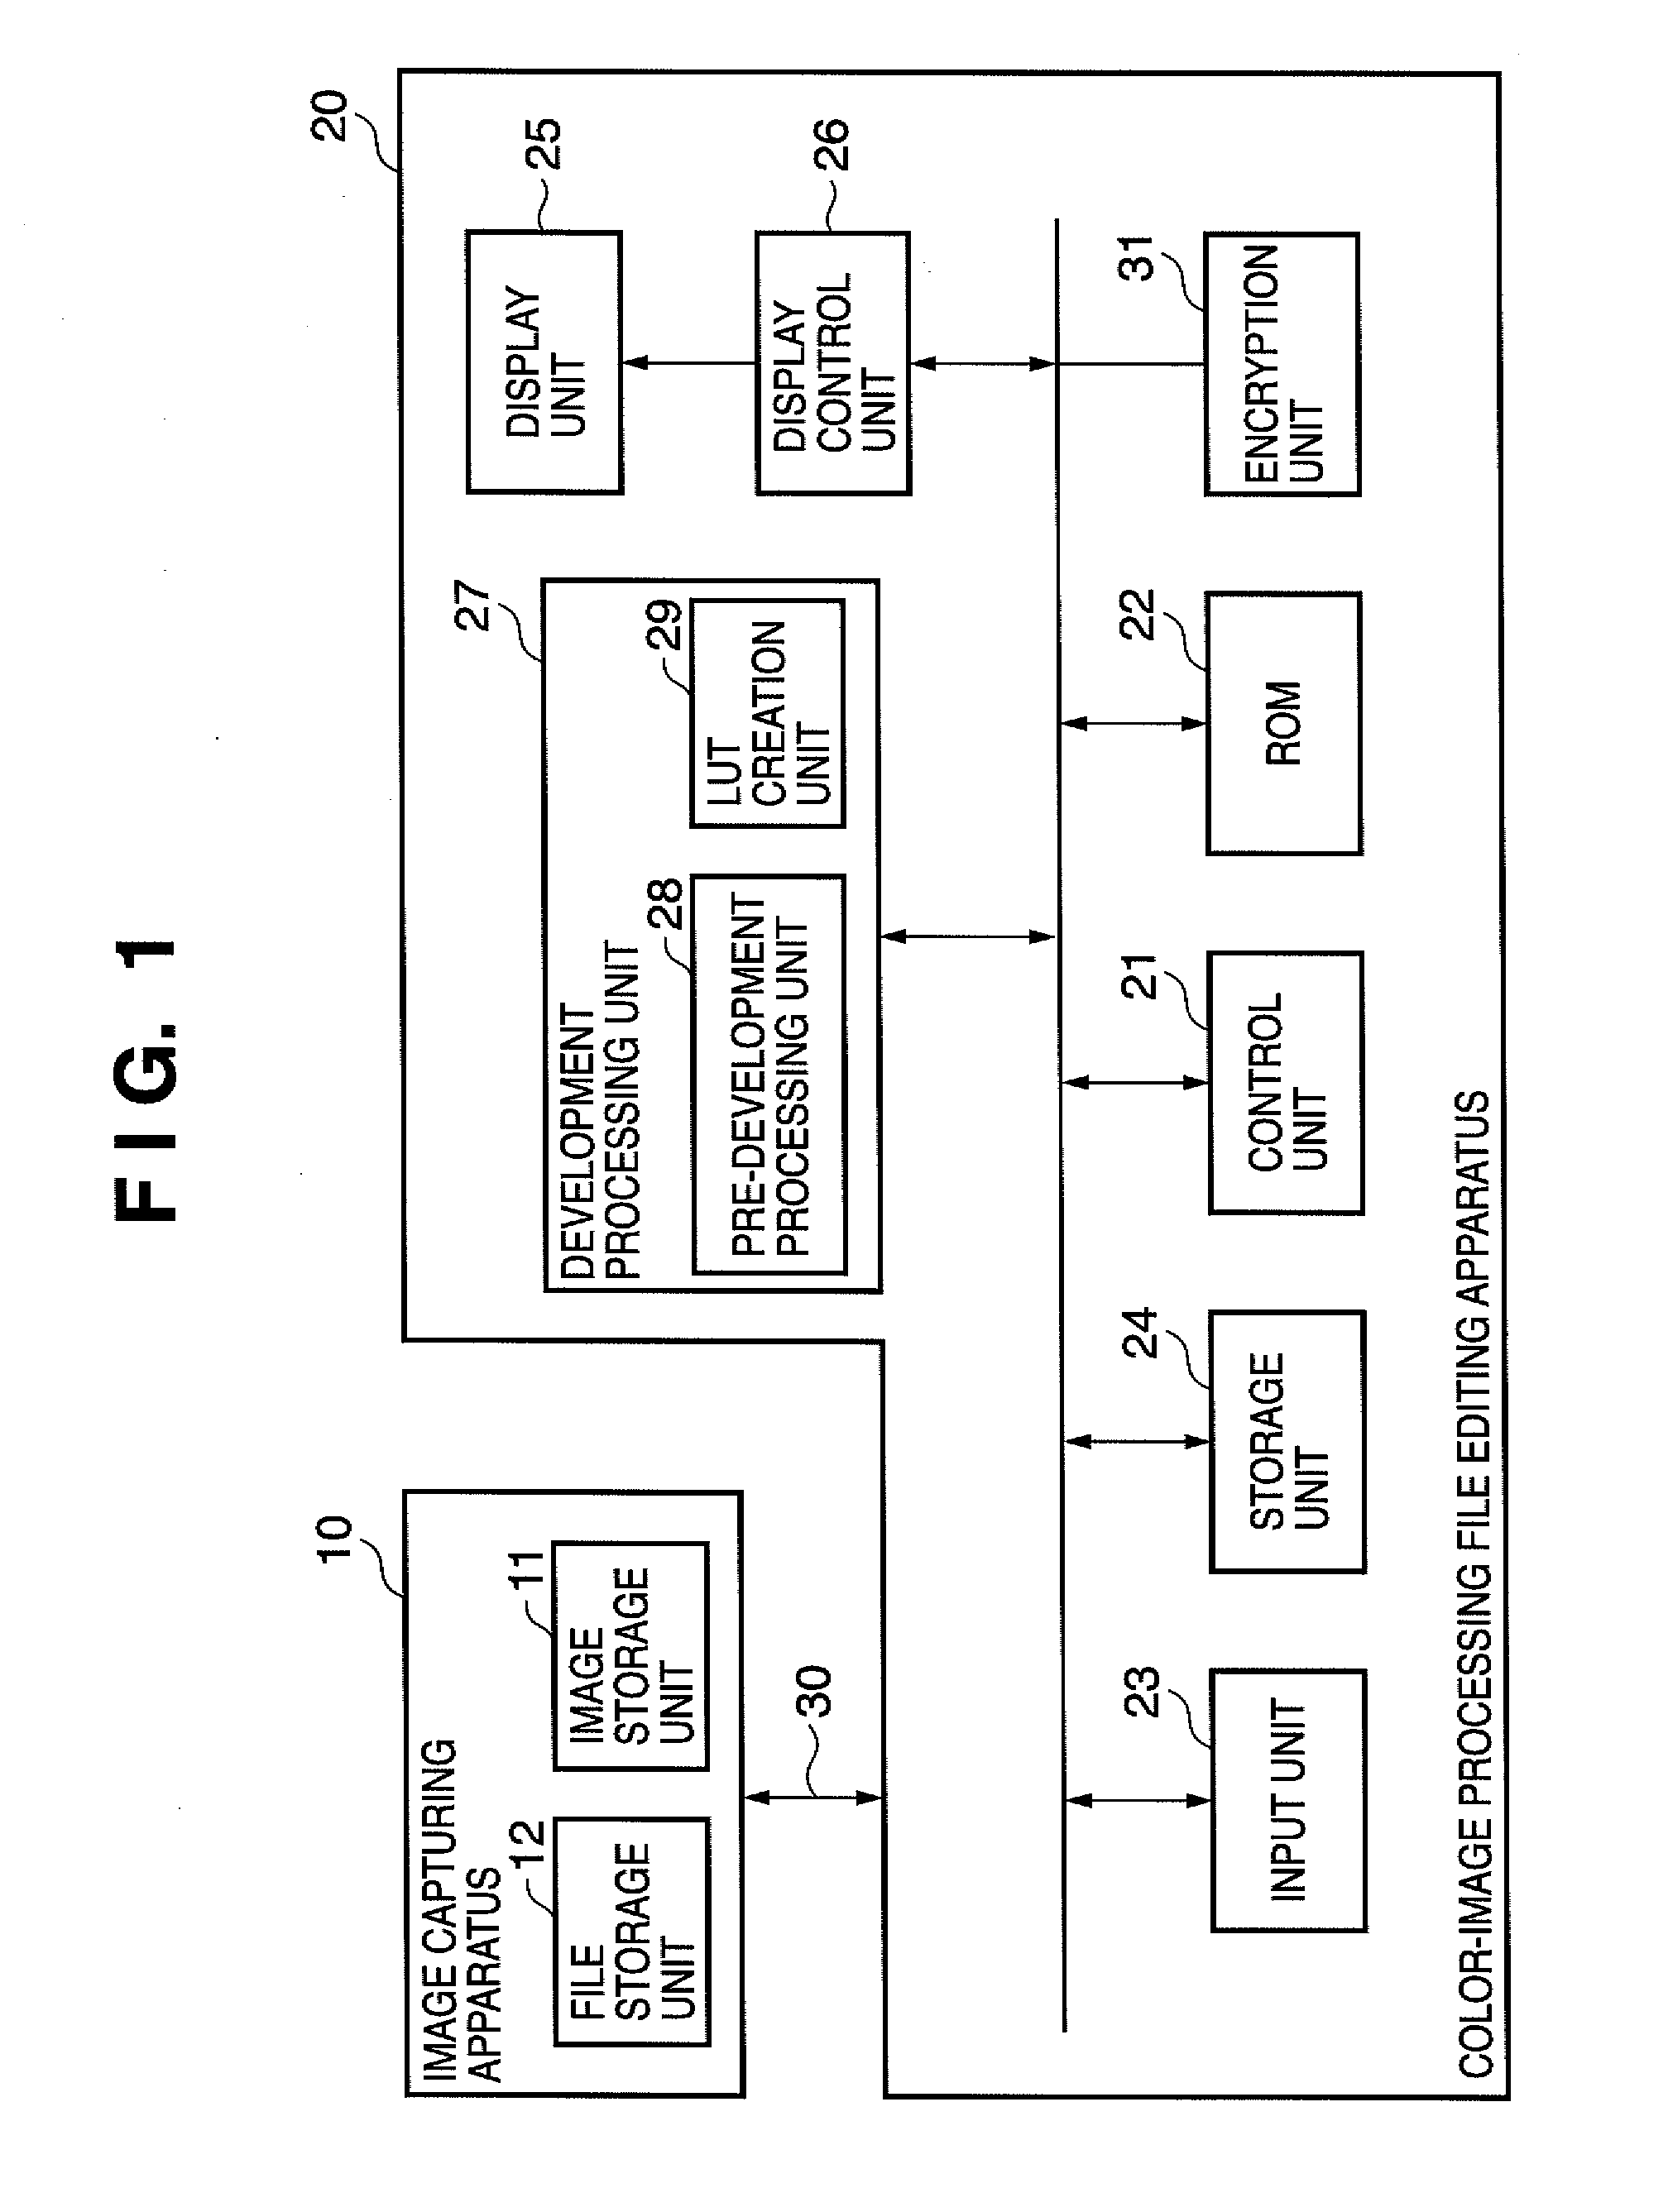 File processing apparatus, file processing method and color-image processing file